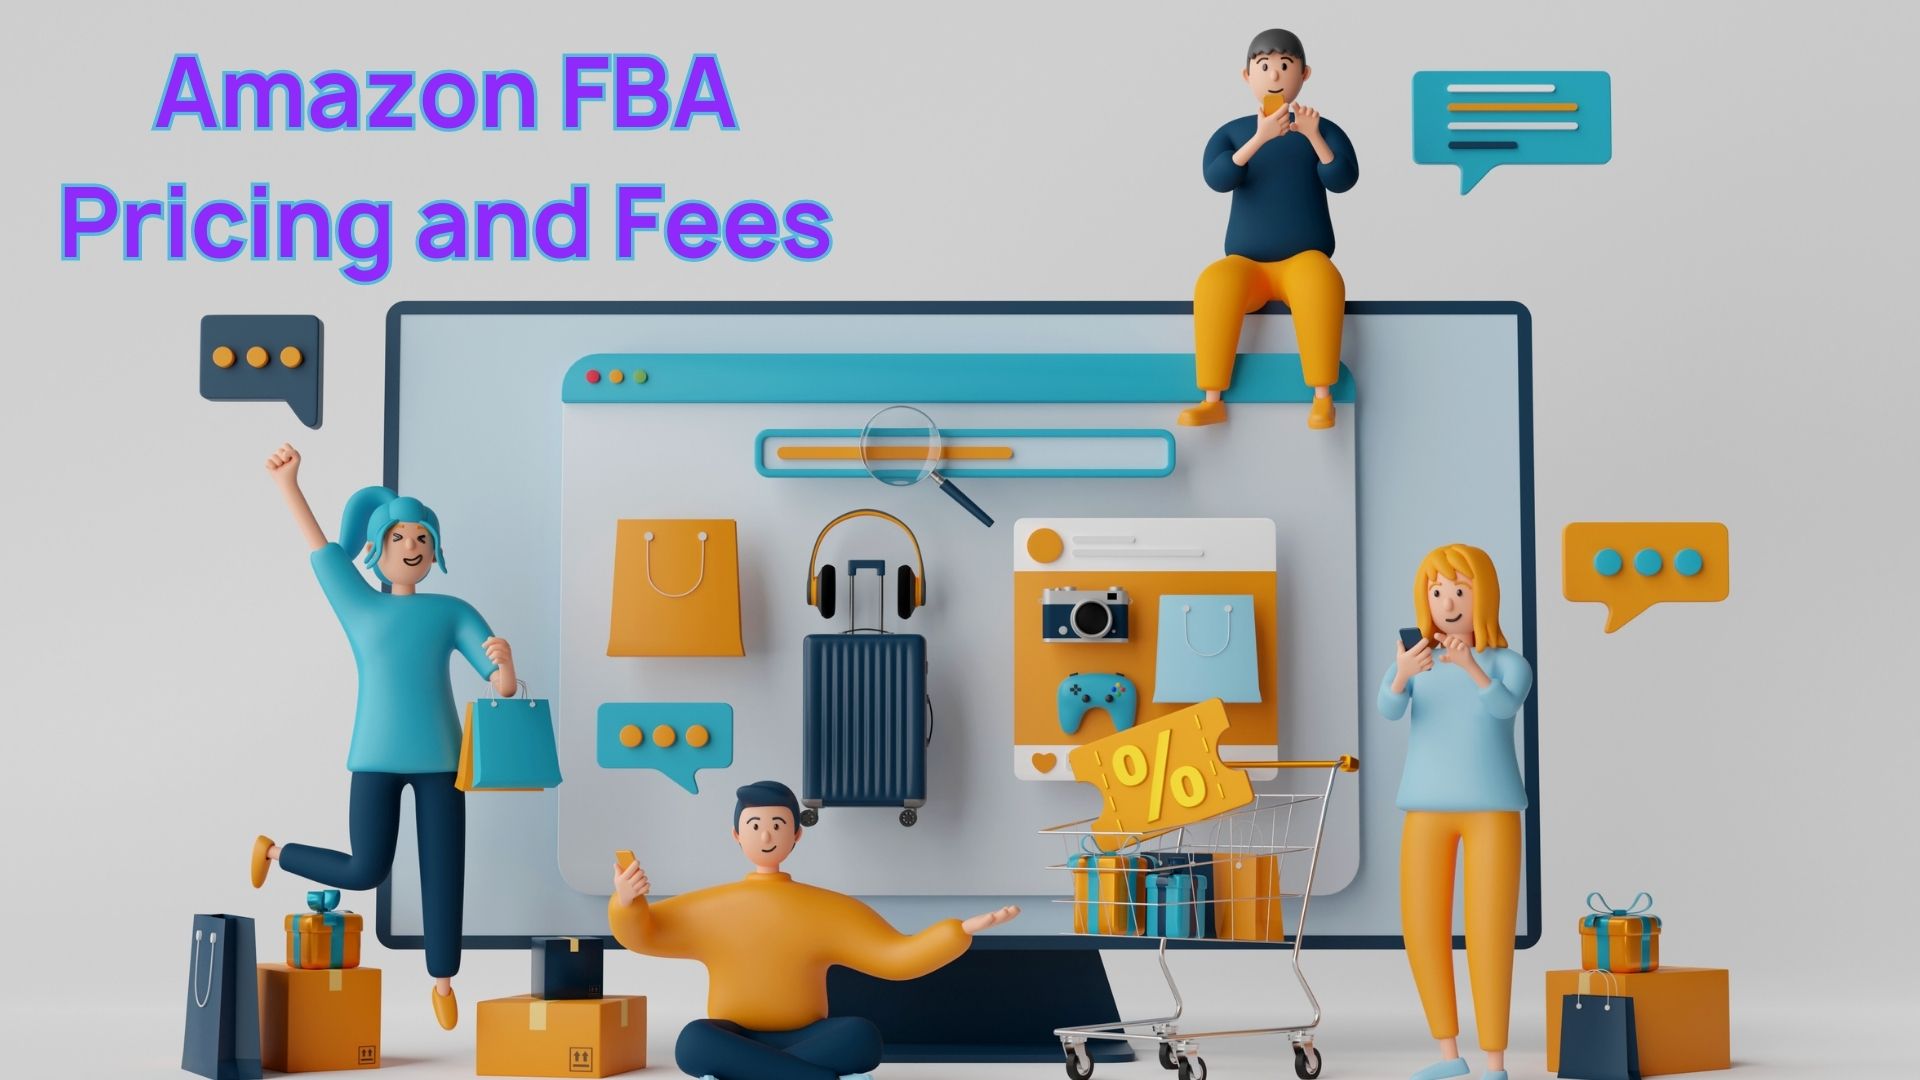 Amazon FBA Pricing and Fees